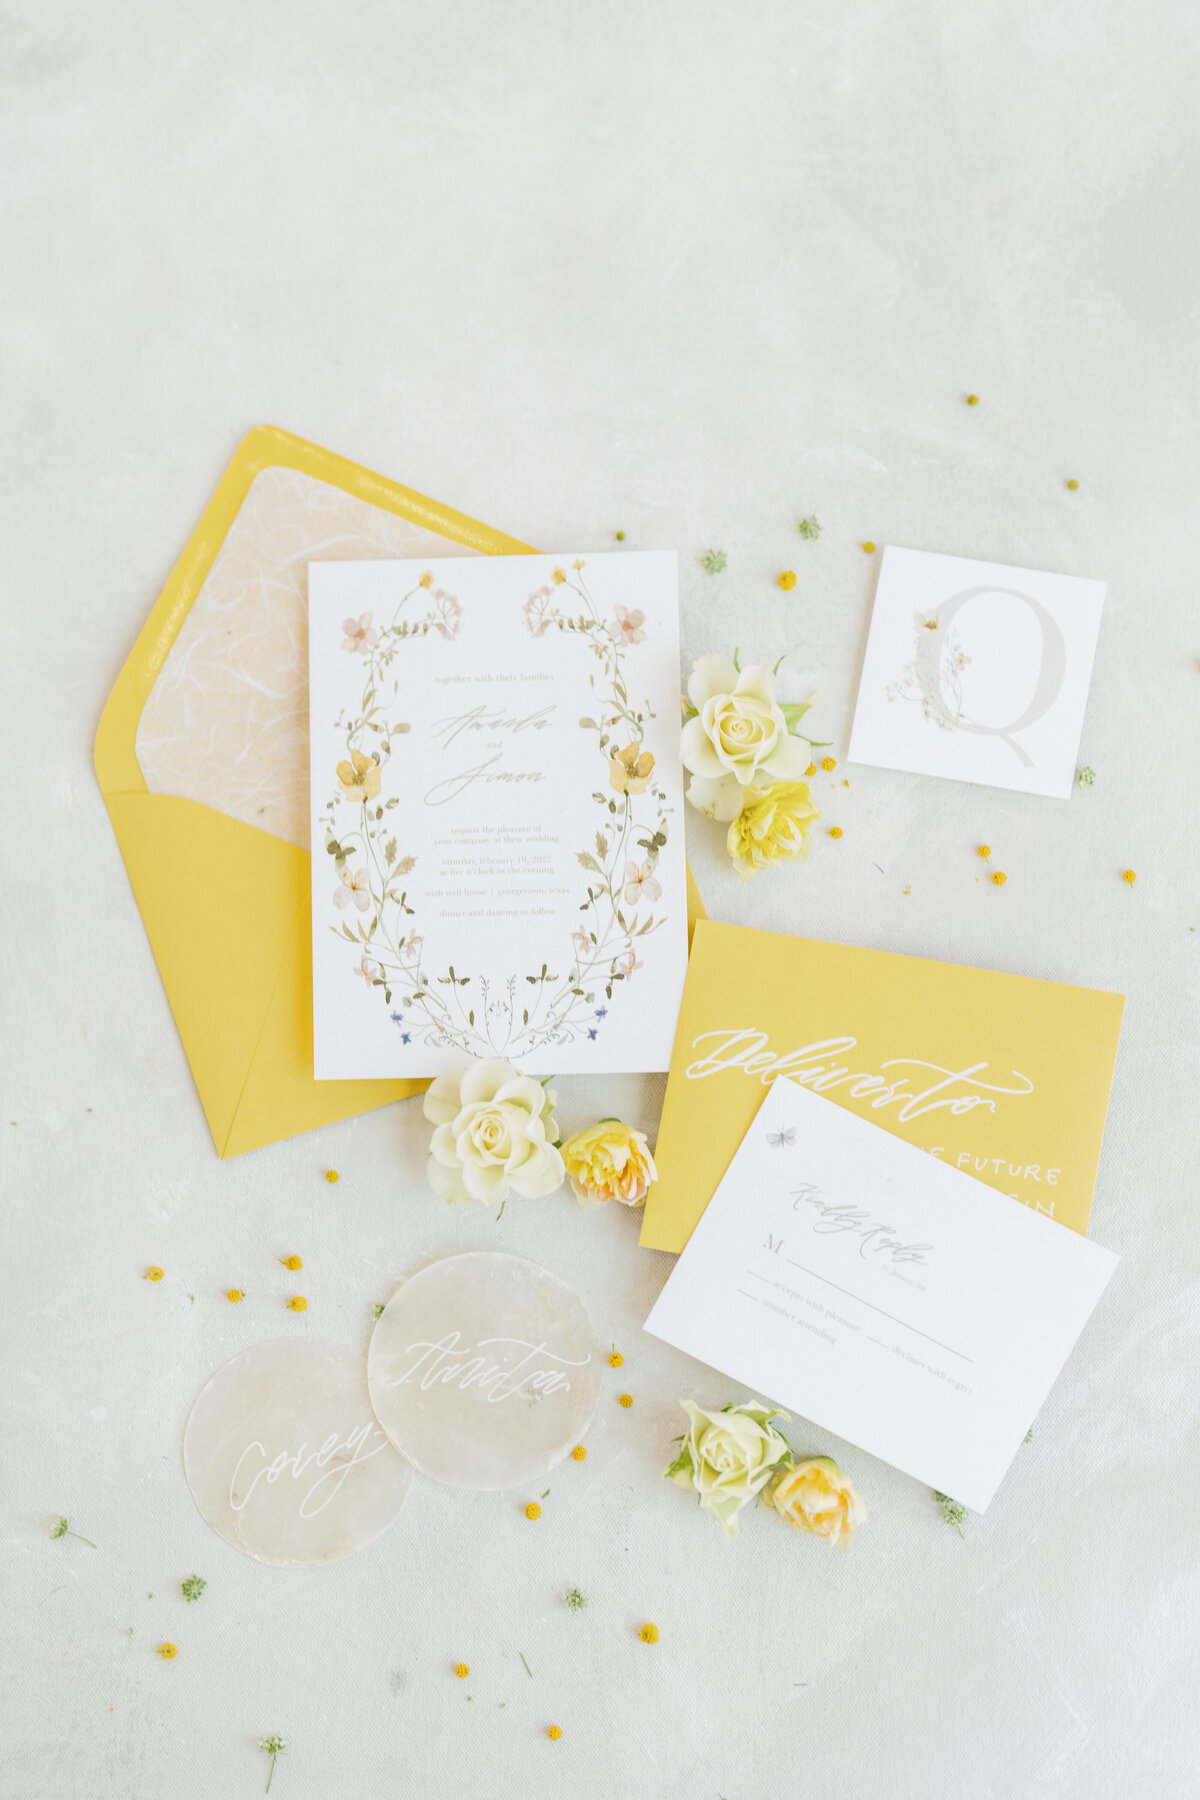 LBV Design House Wedding Design Planning Day-Of Signage Paper Goods Shoppable Accessories Wedding Day Austin, Texas beyond Valerie Strenk Lettered by Valerie Hand Lettering12